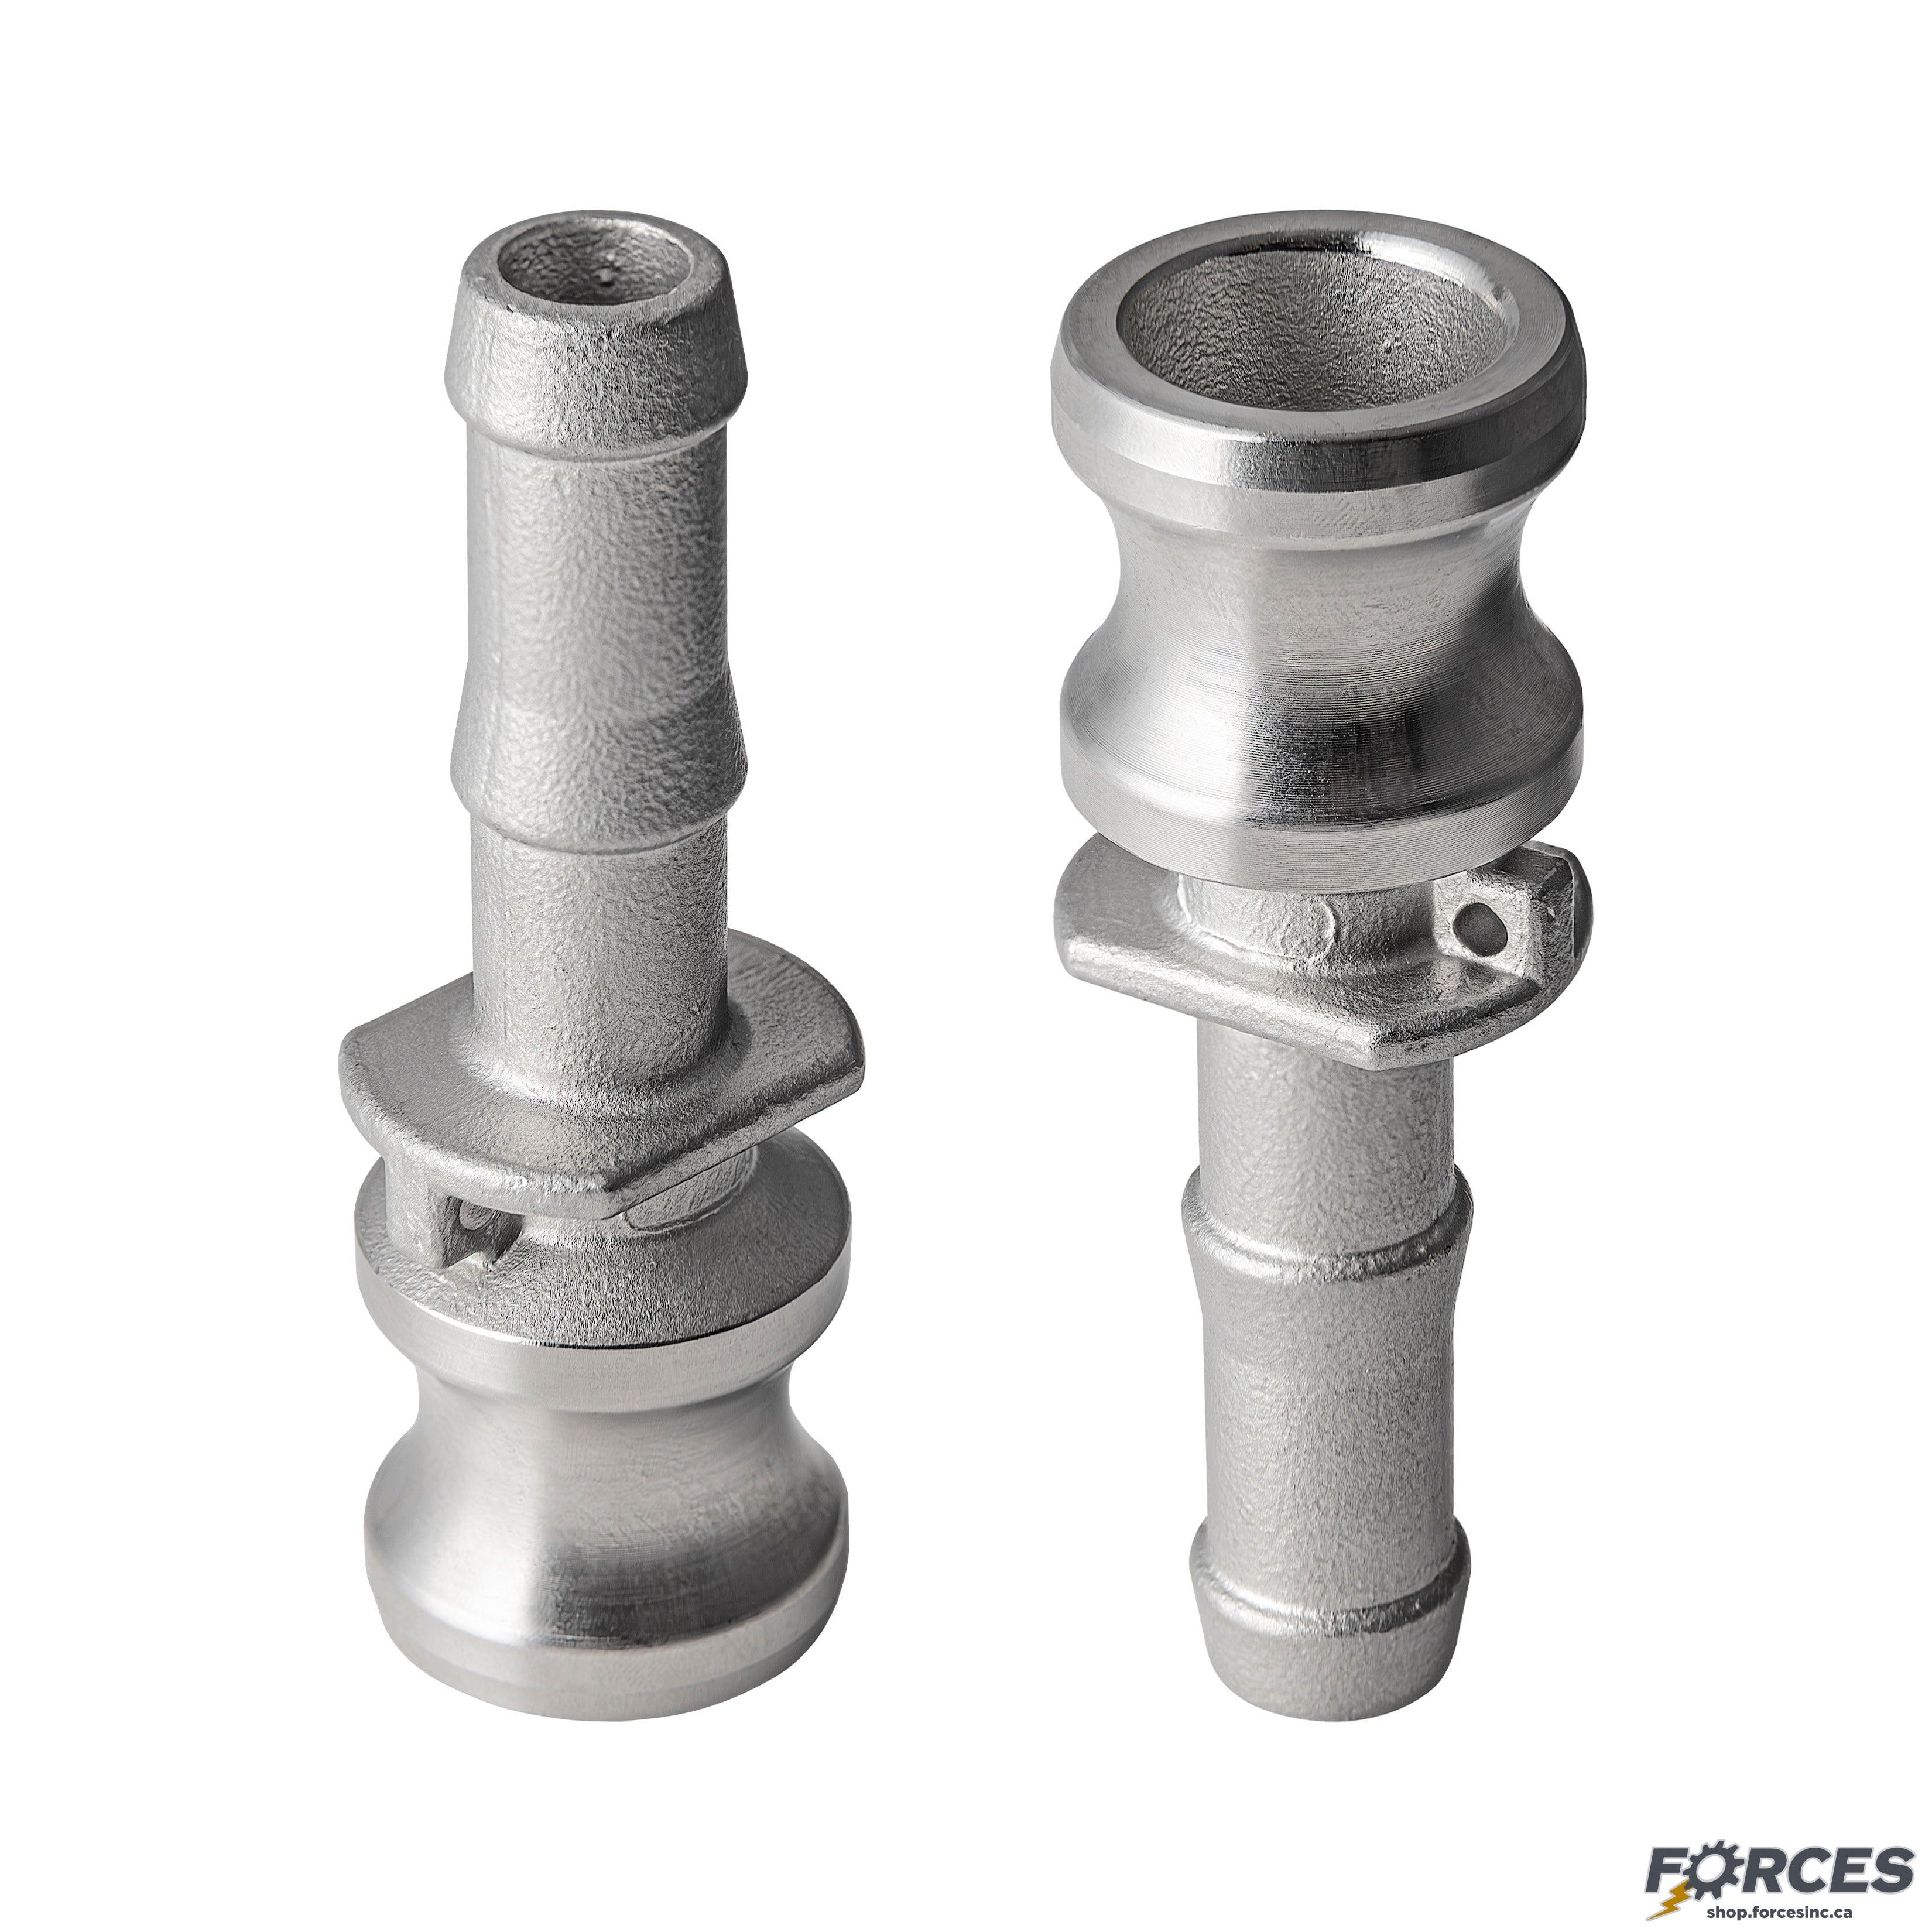 2-1/2" Type E Camlock Fitting Stainless Steel 316 - Forces Inc